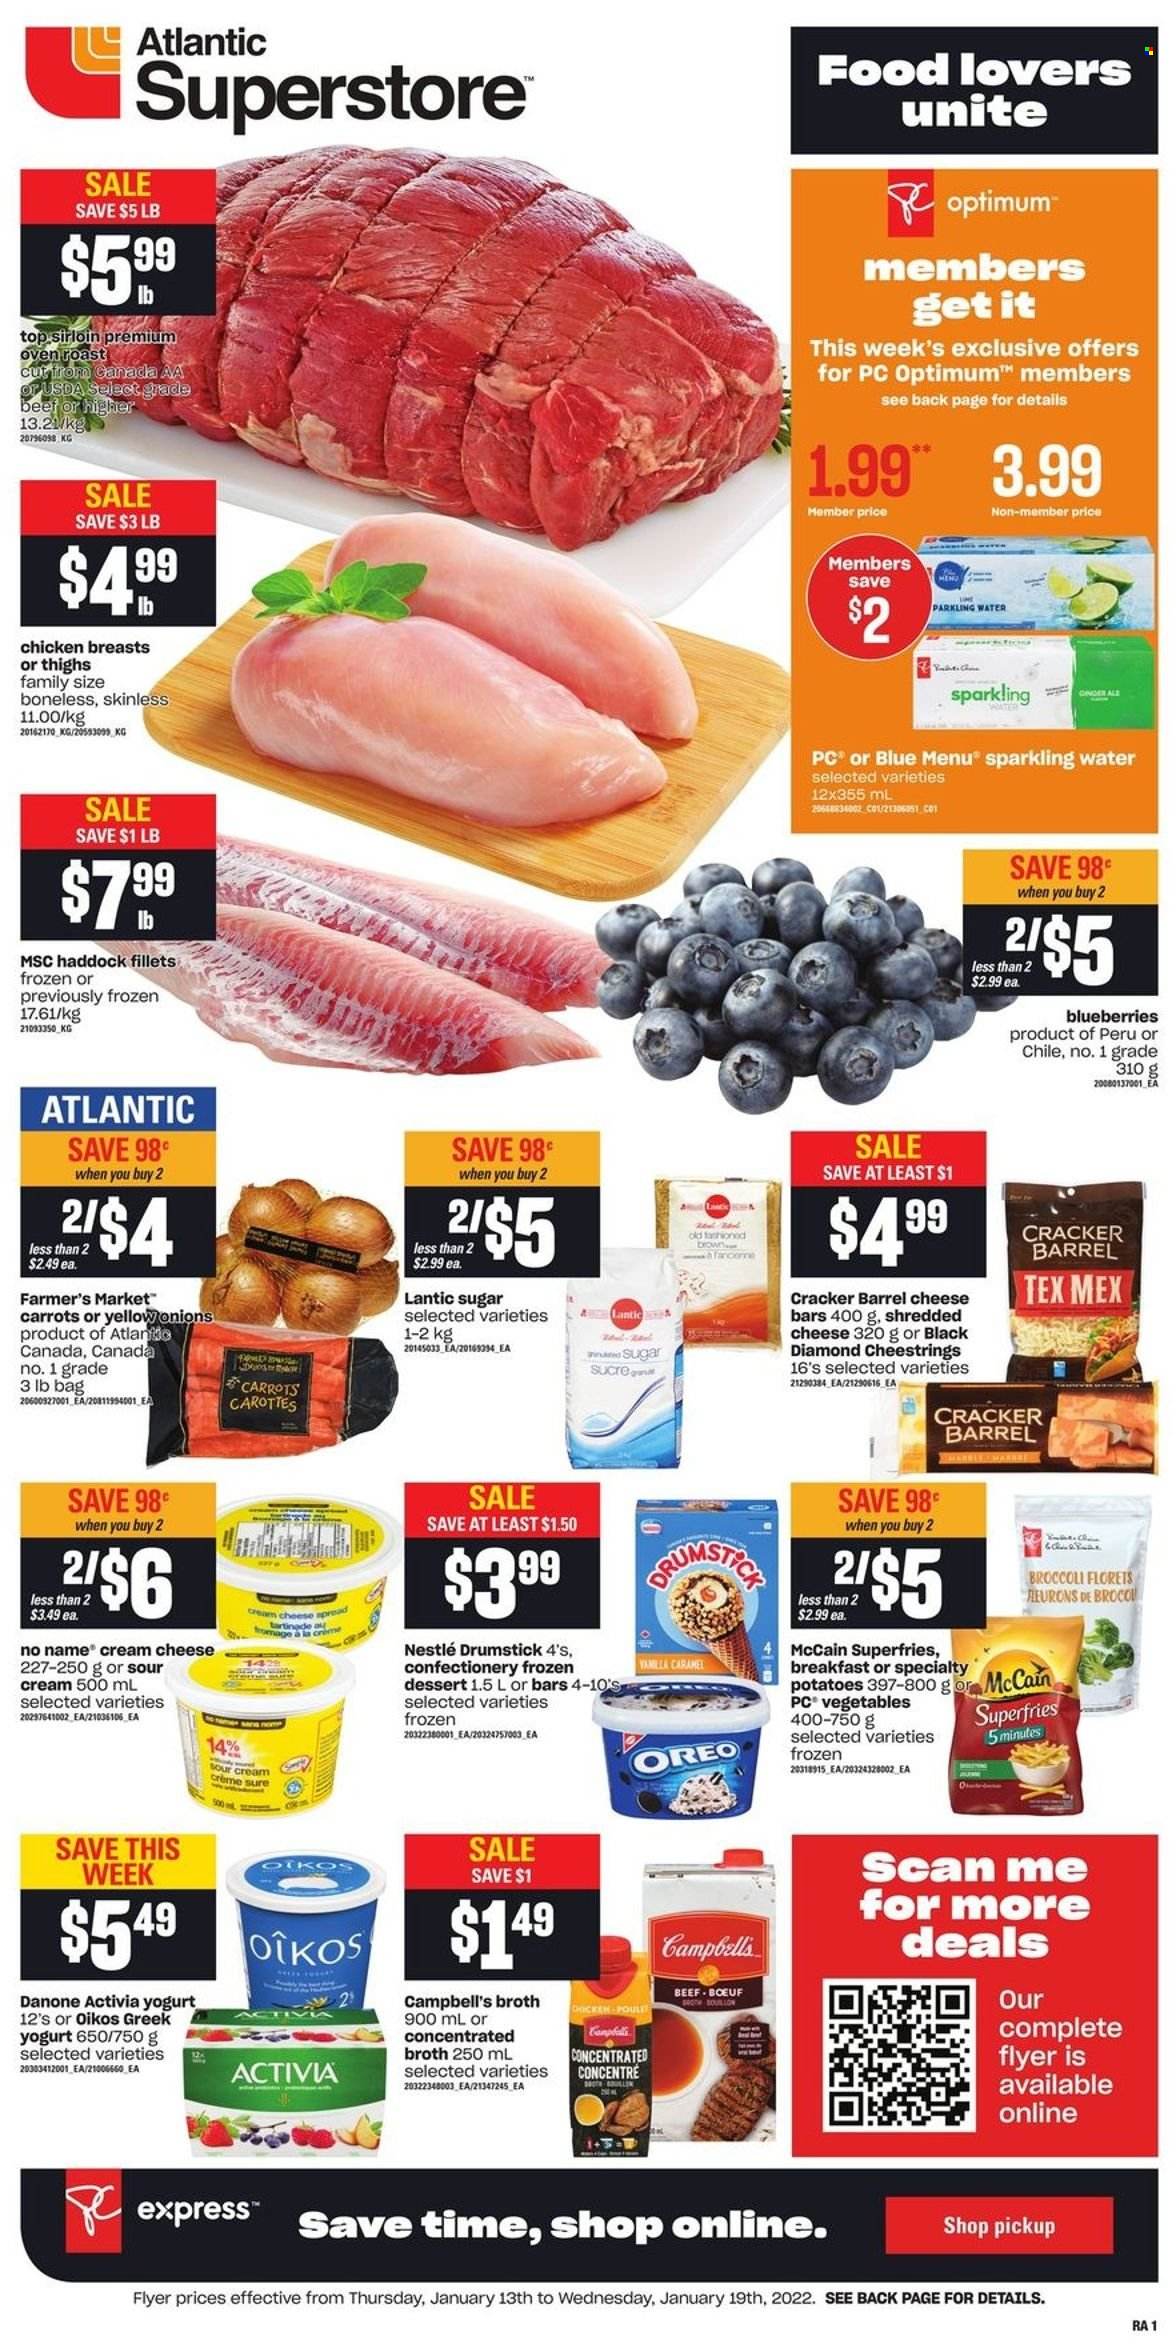 thumbnail - Atlantic Superstore Flyer - January 13, 2022 - January 19, 2022 - Sales products - broccoli, carrots, potatoes, blueberries, haddock, No Name, Campbell's, cream cheese, shredded cheese, string cheese, greek yoghurt, yoghurt, Activia, Oikos, sour cream, McCain, potato fries, crackers, sugar, broth, caramel, sparkling water, chicken breasts, Sure, Optimum, Oreo, Danone, Nestlé. Page 1.